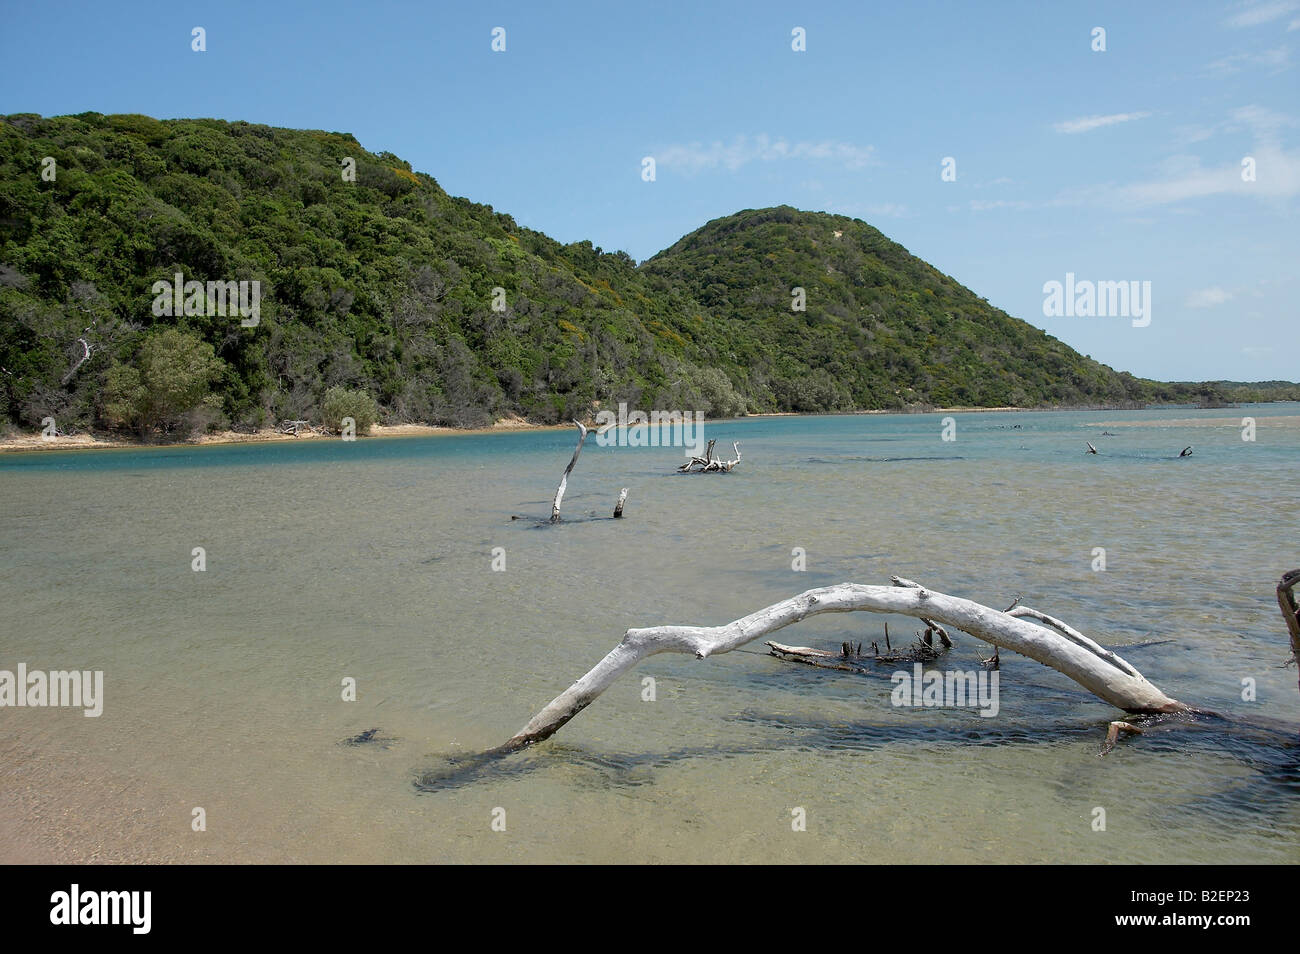 Driftwood in shallow water at Kozi bay Stock Photo